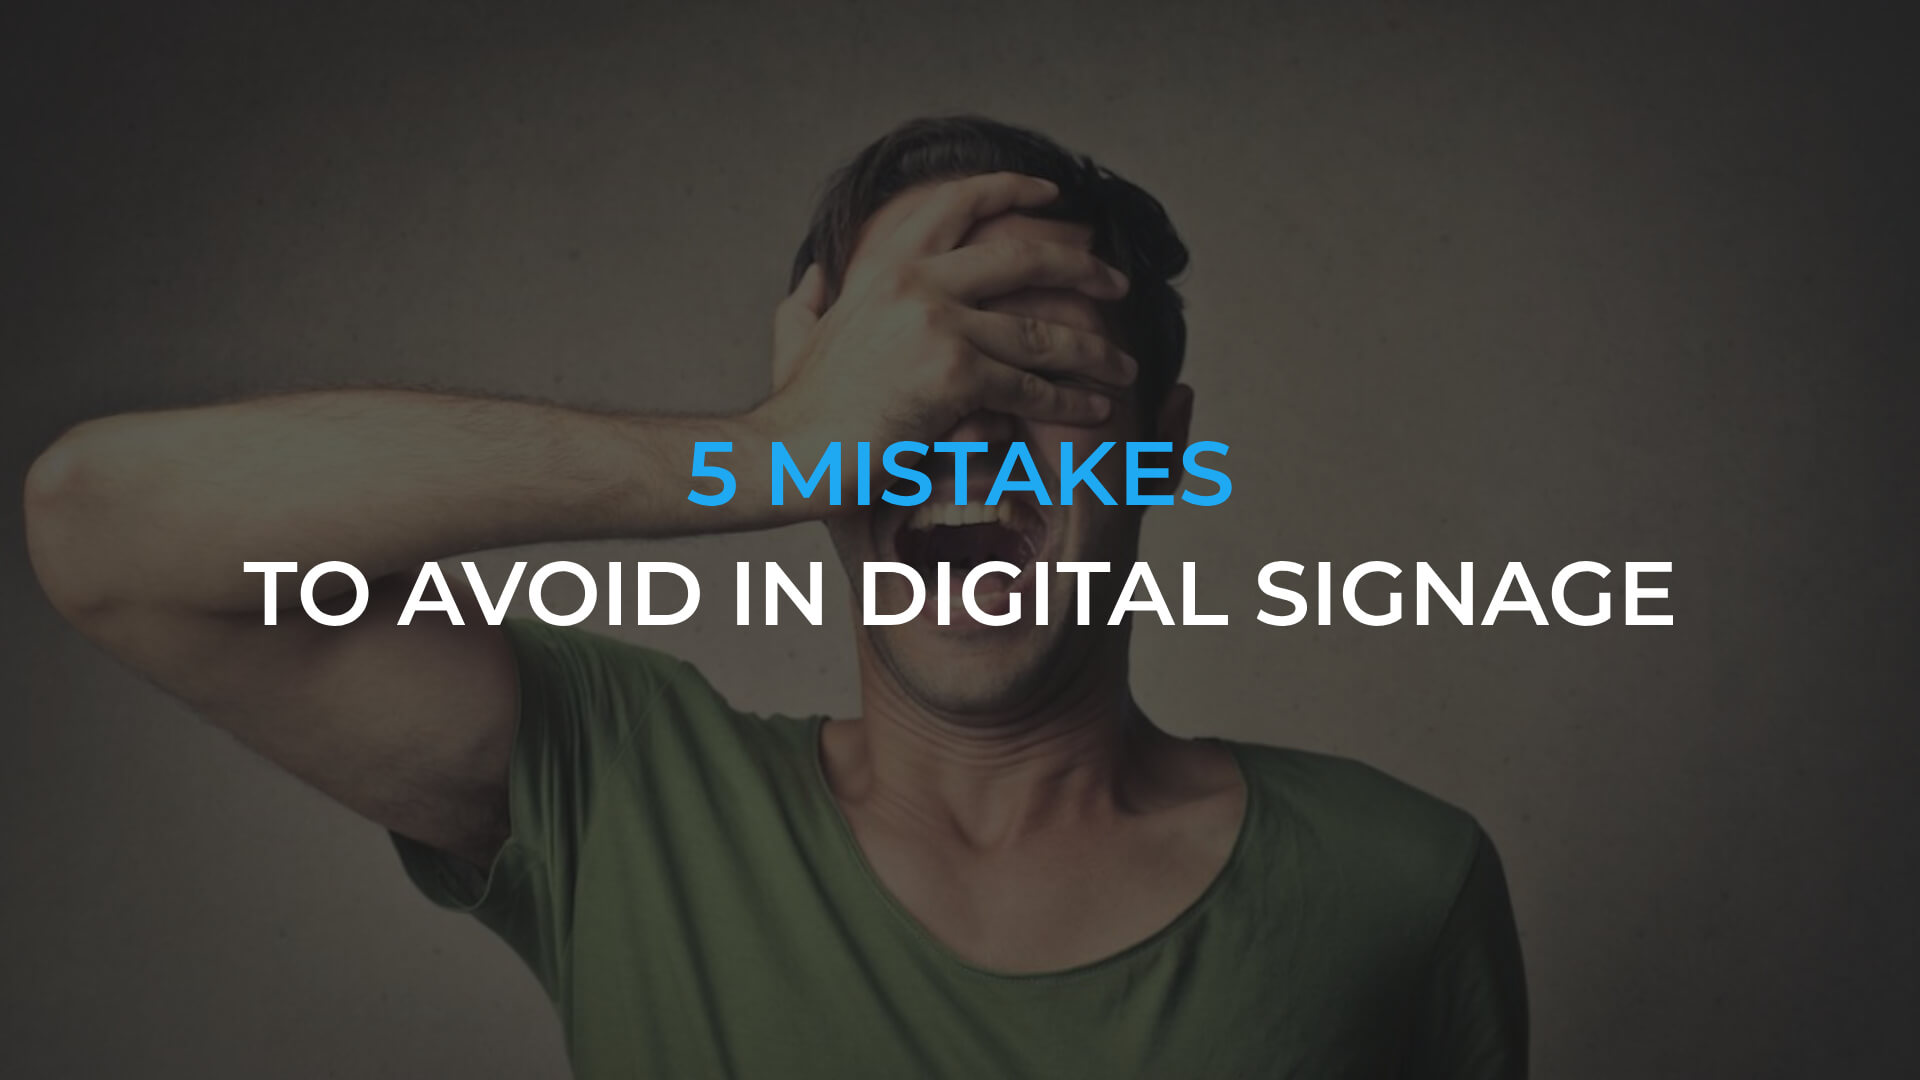 5 biggest mistakes to avoid in digital signage